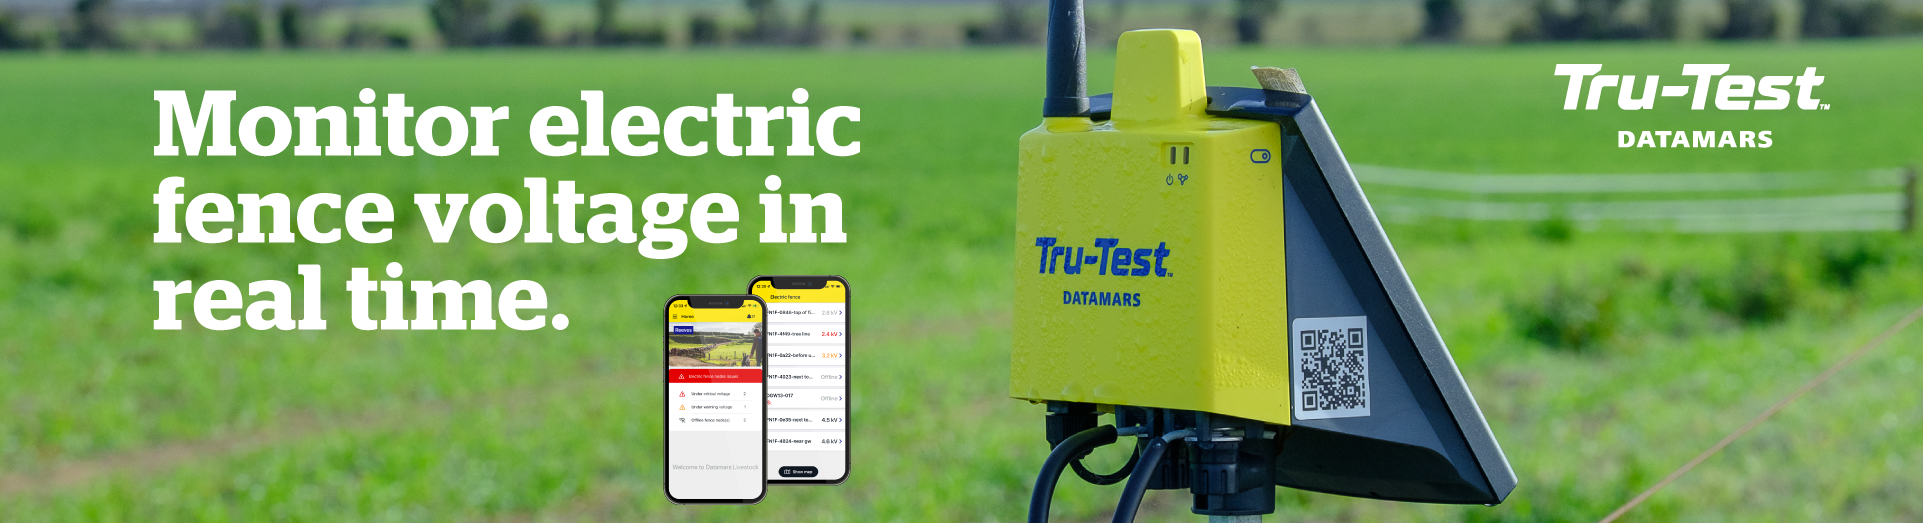 Monitor electric fence voltage in real time